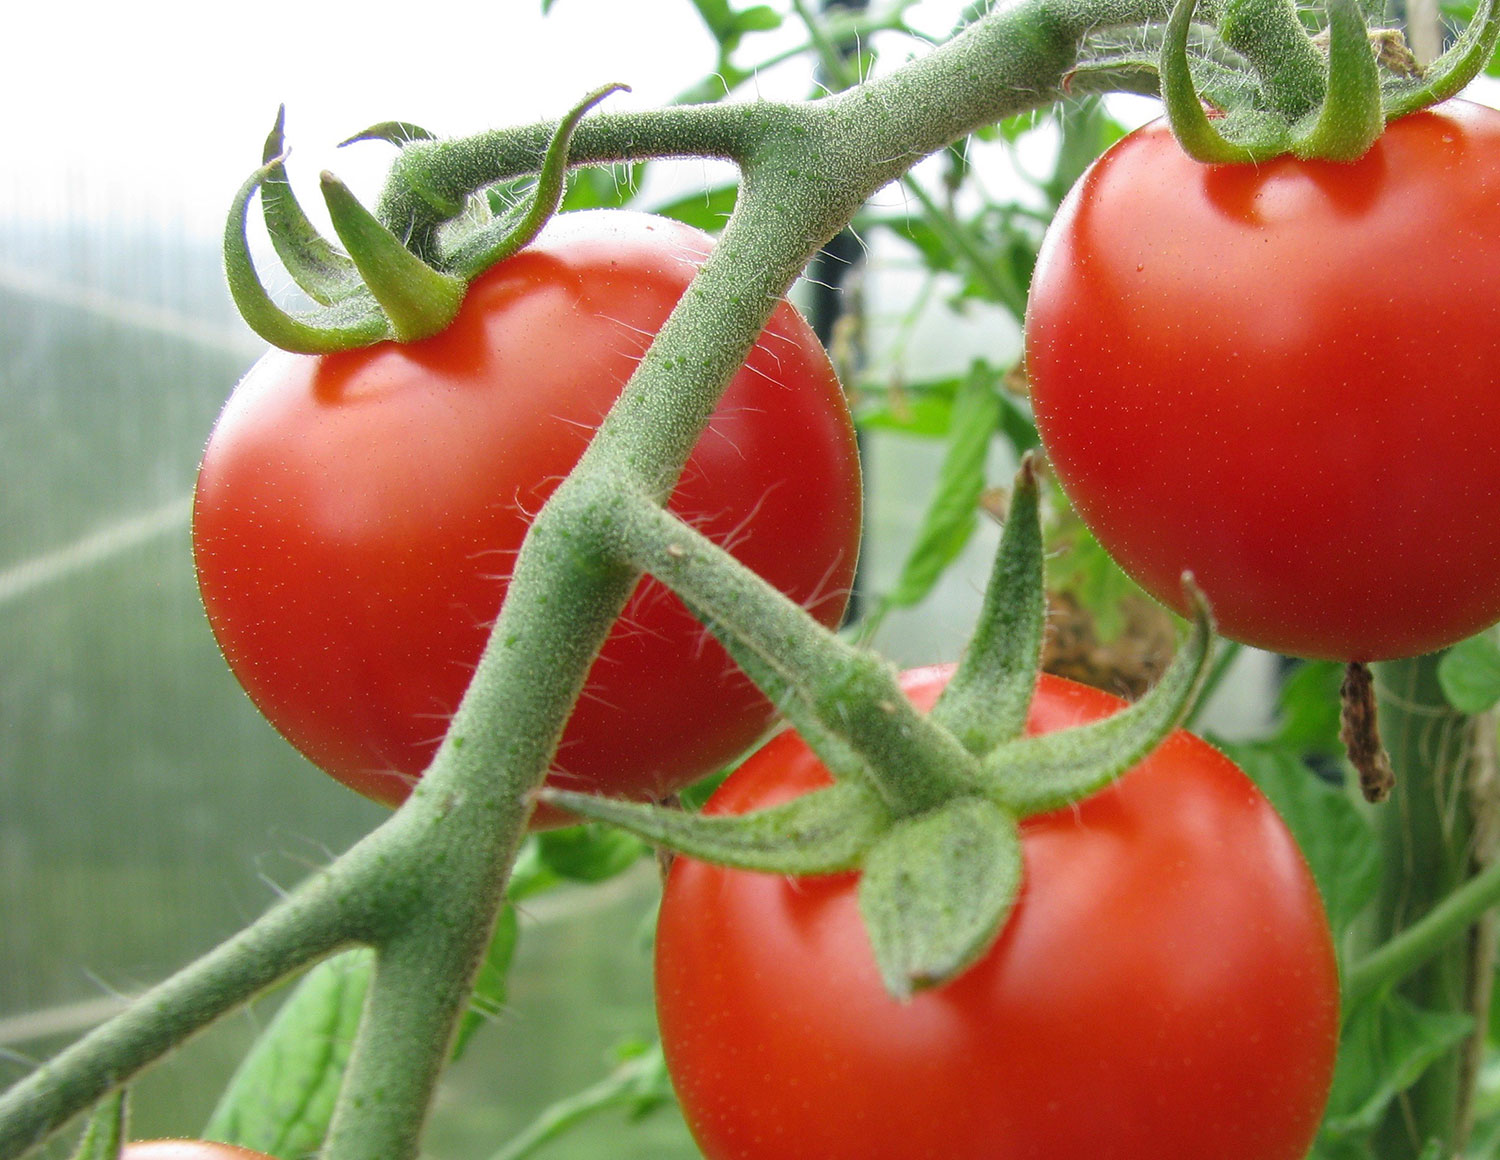 Once picked, tomatoes don't tend to last long, unless you've got the right variety.